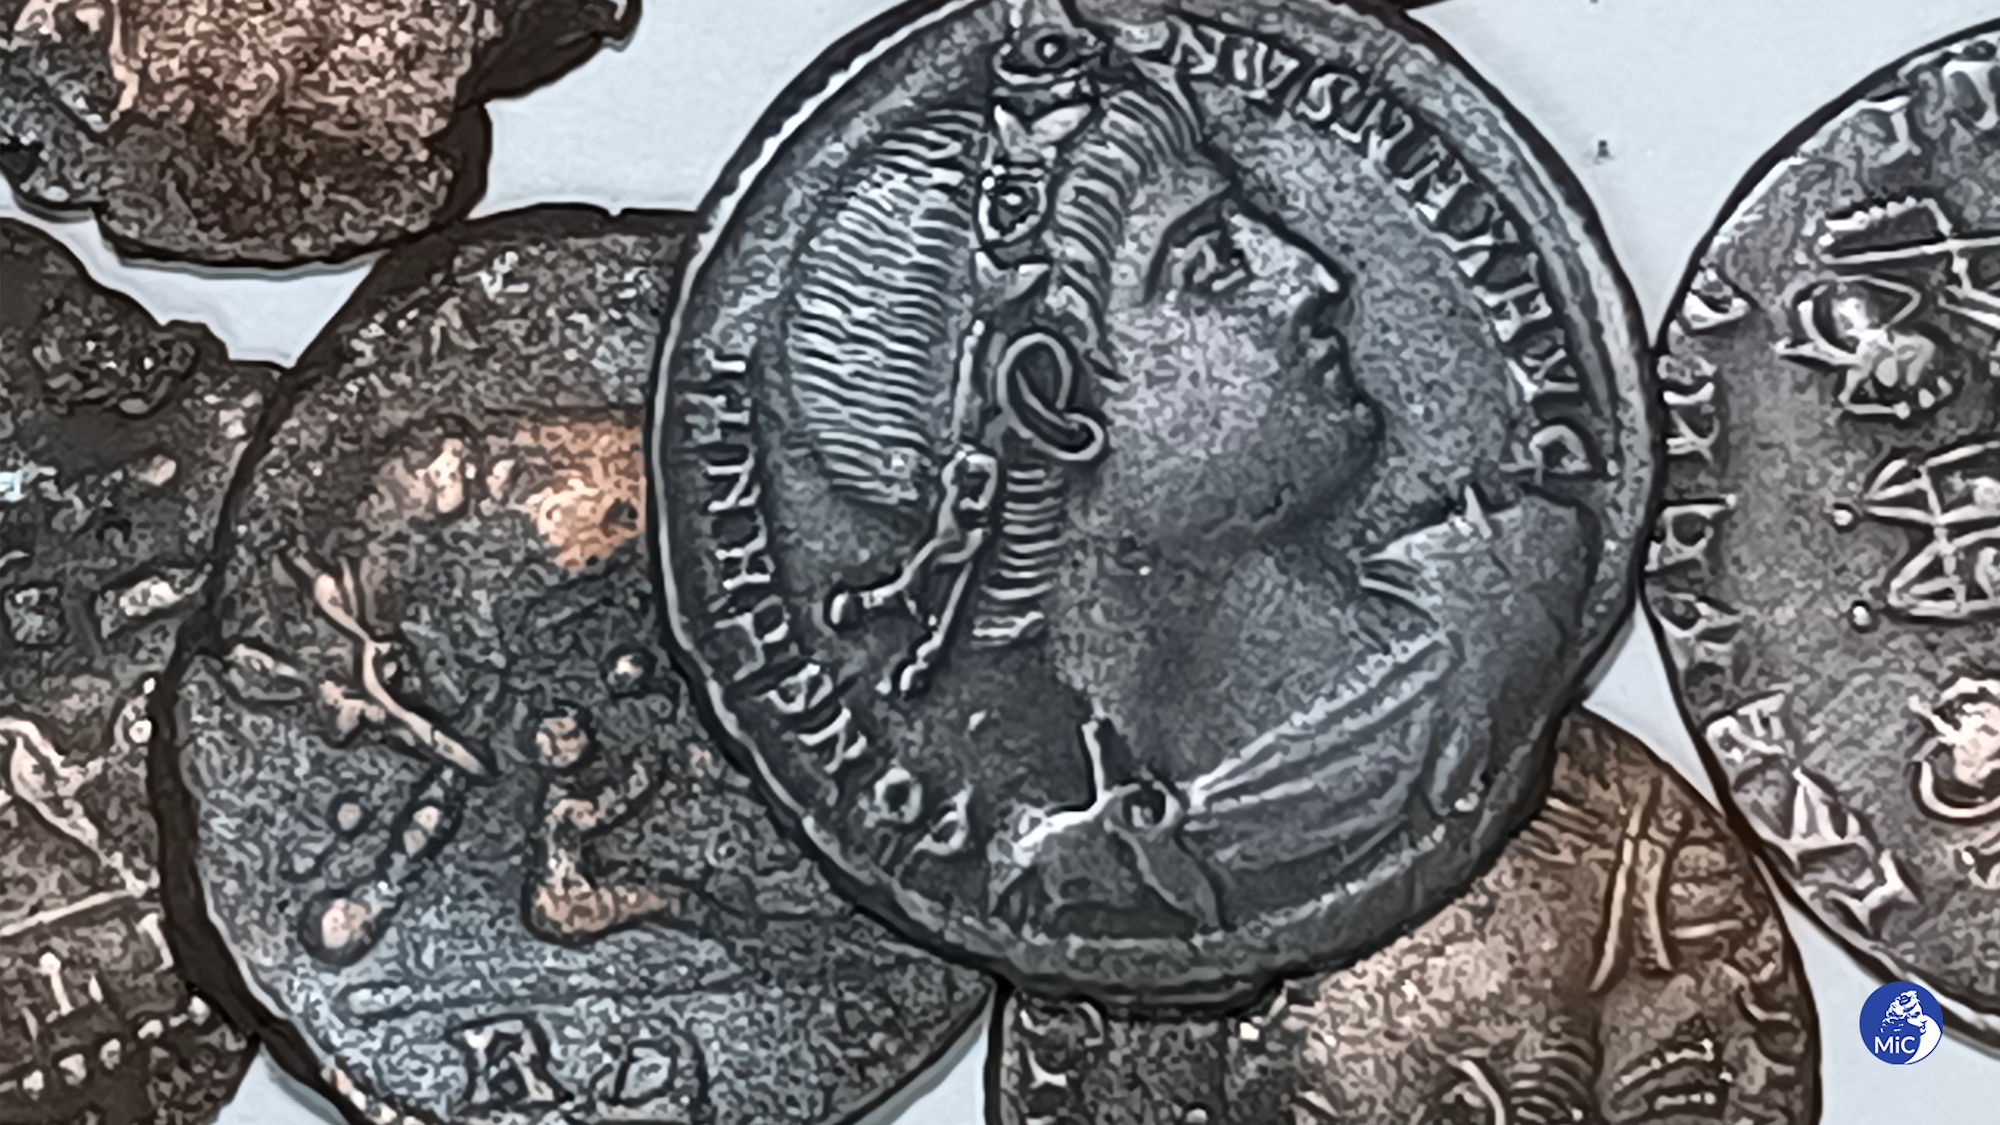 Divers recovered a treasure trove of over 30,000 ancient, bronze coins off the Italian coast